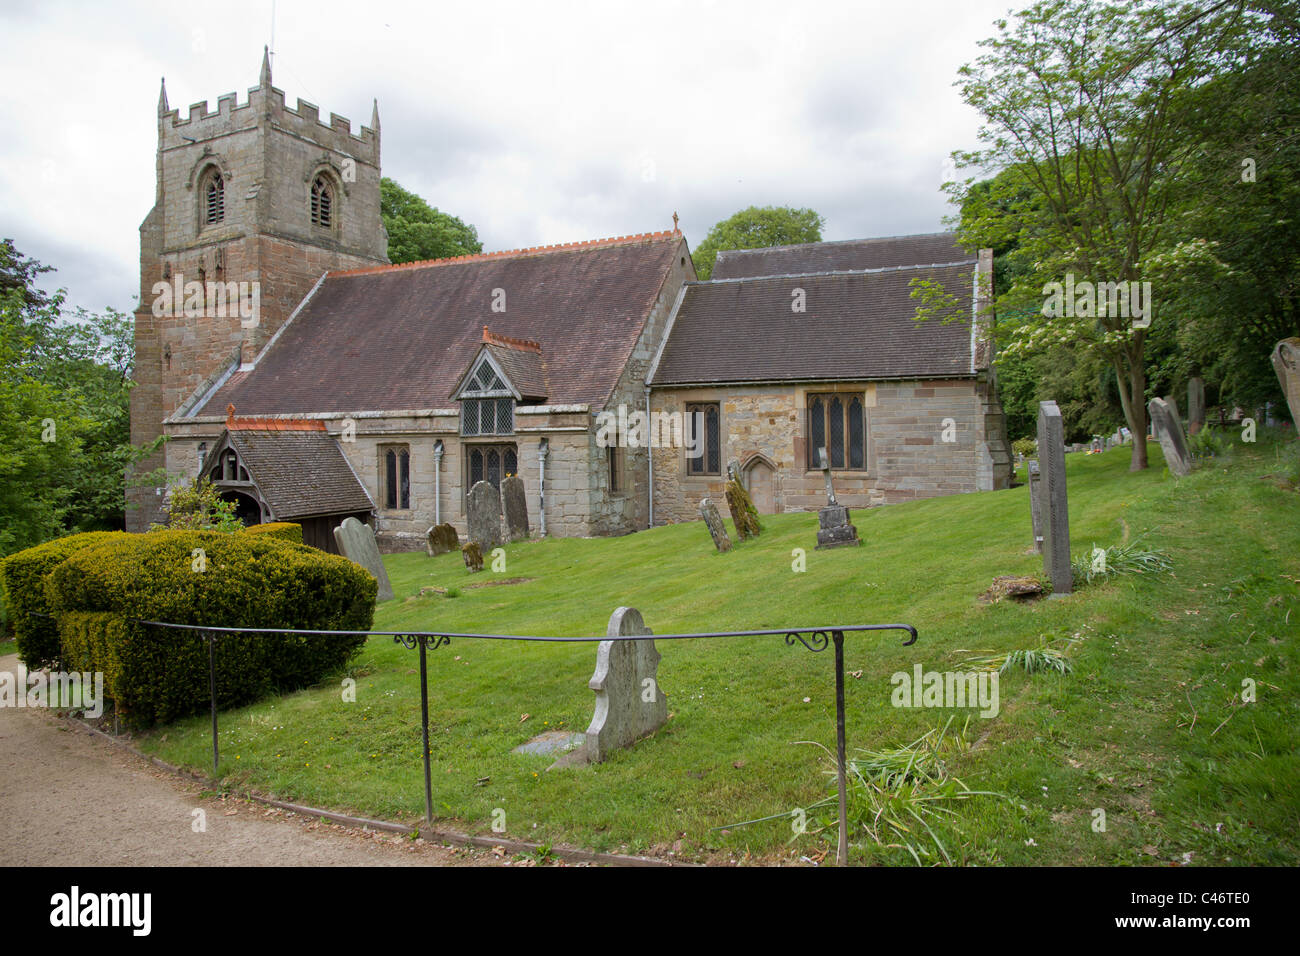 Village churches, inside and out. Short series. Stock Photo